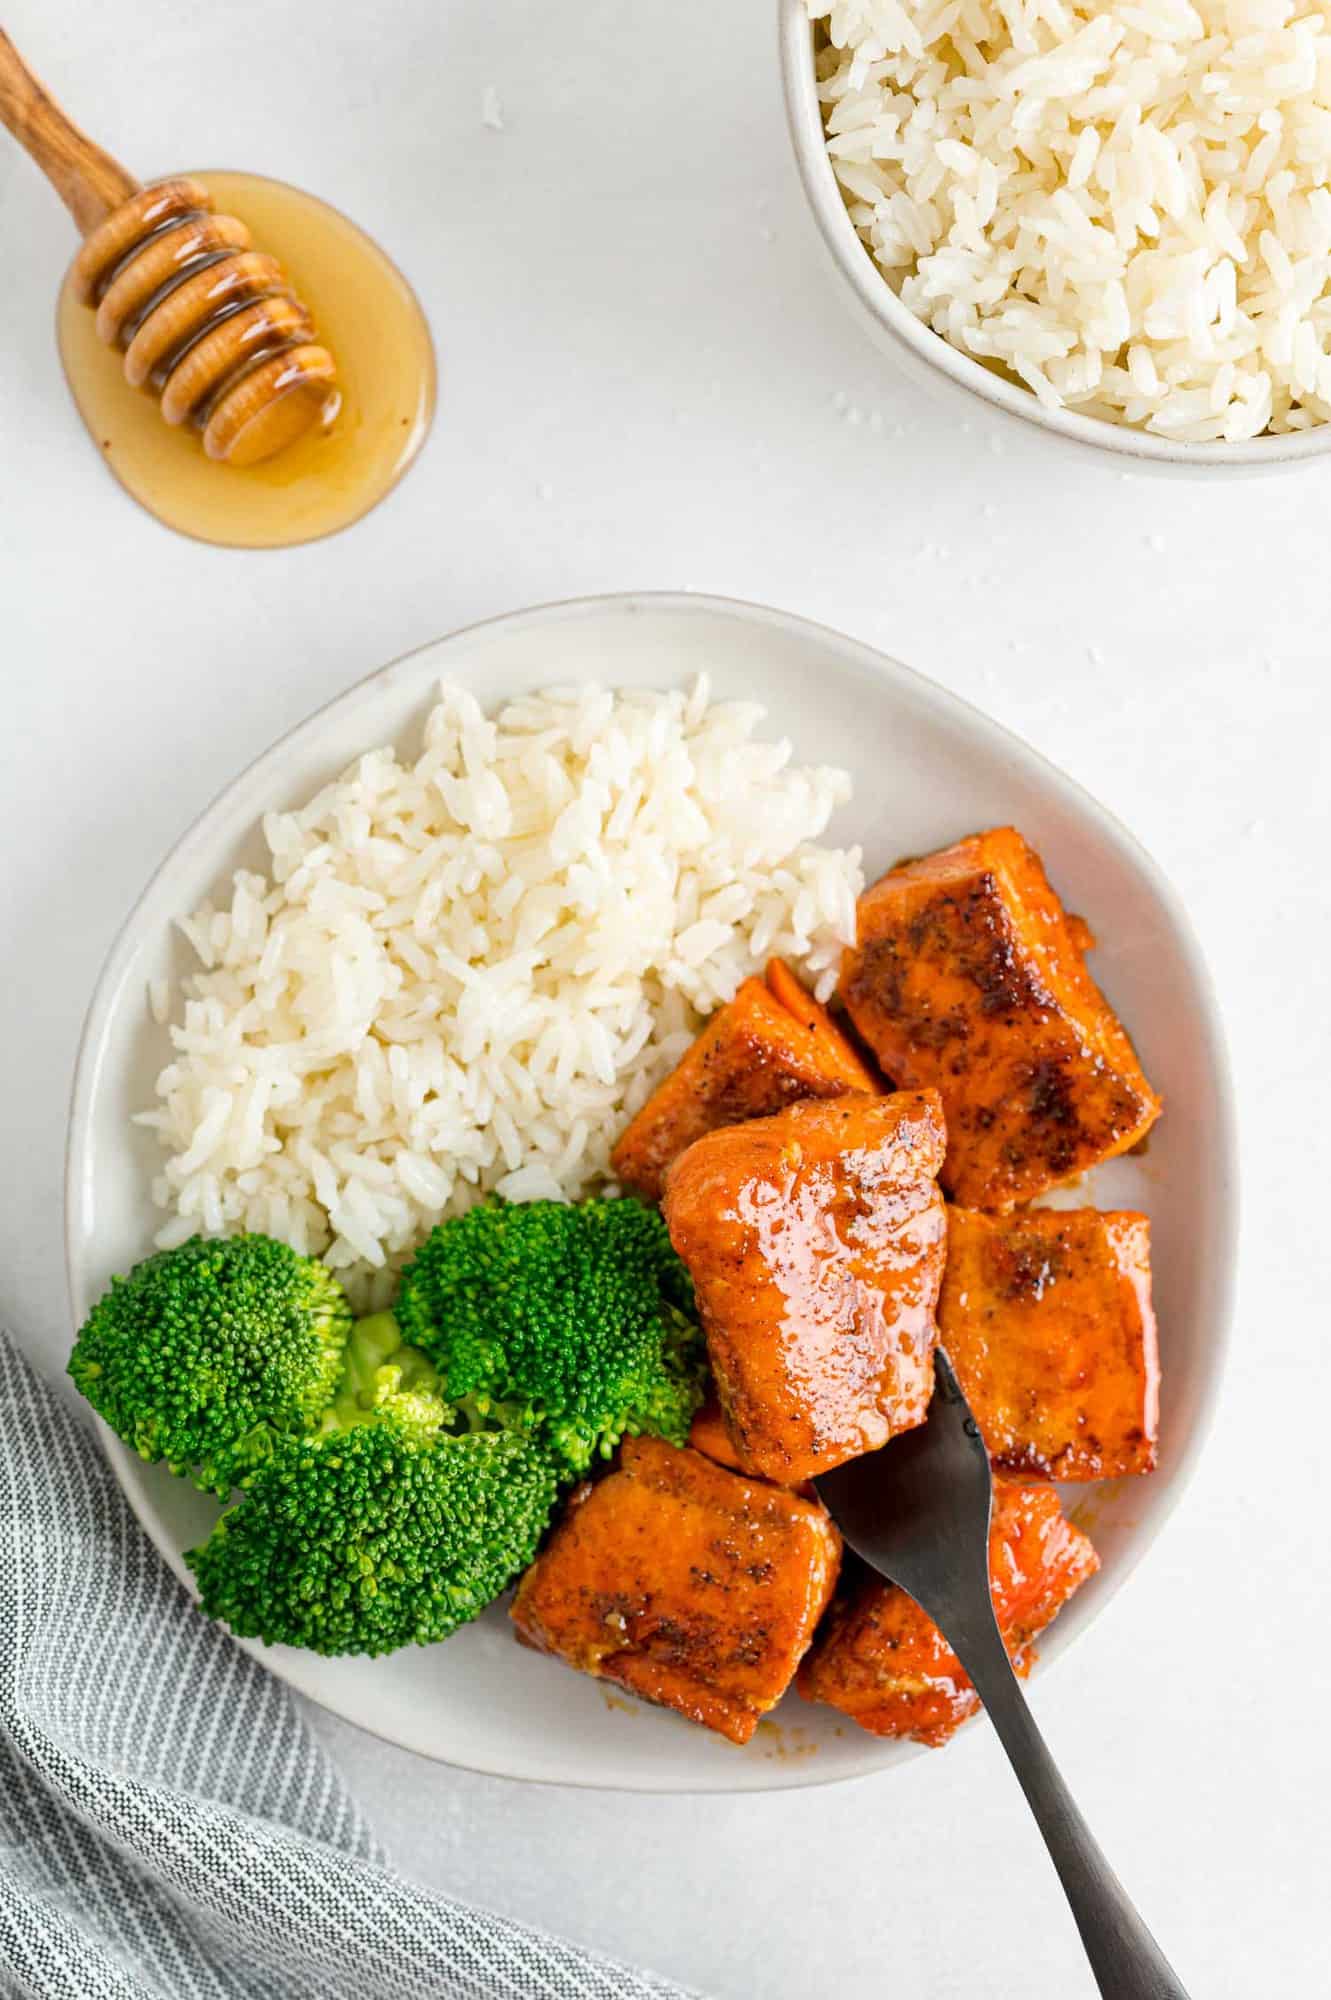 Salmon pieces on a plate with broccoli and rice.